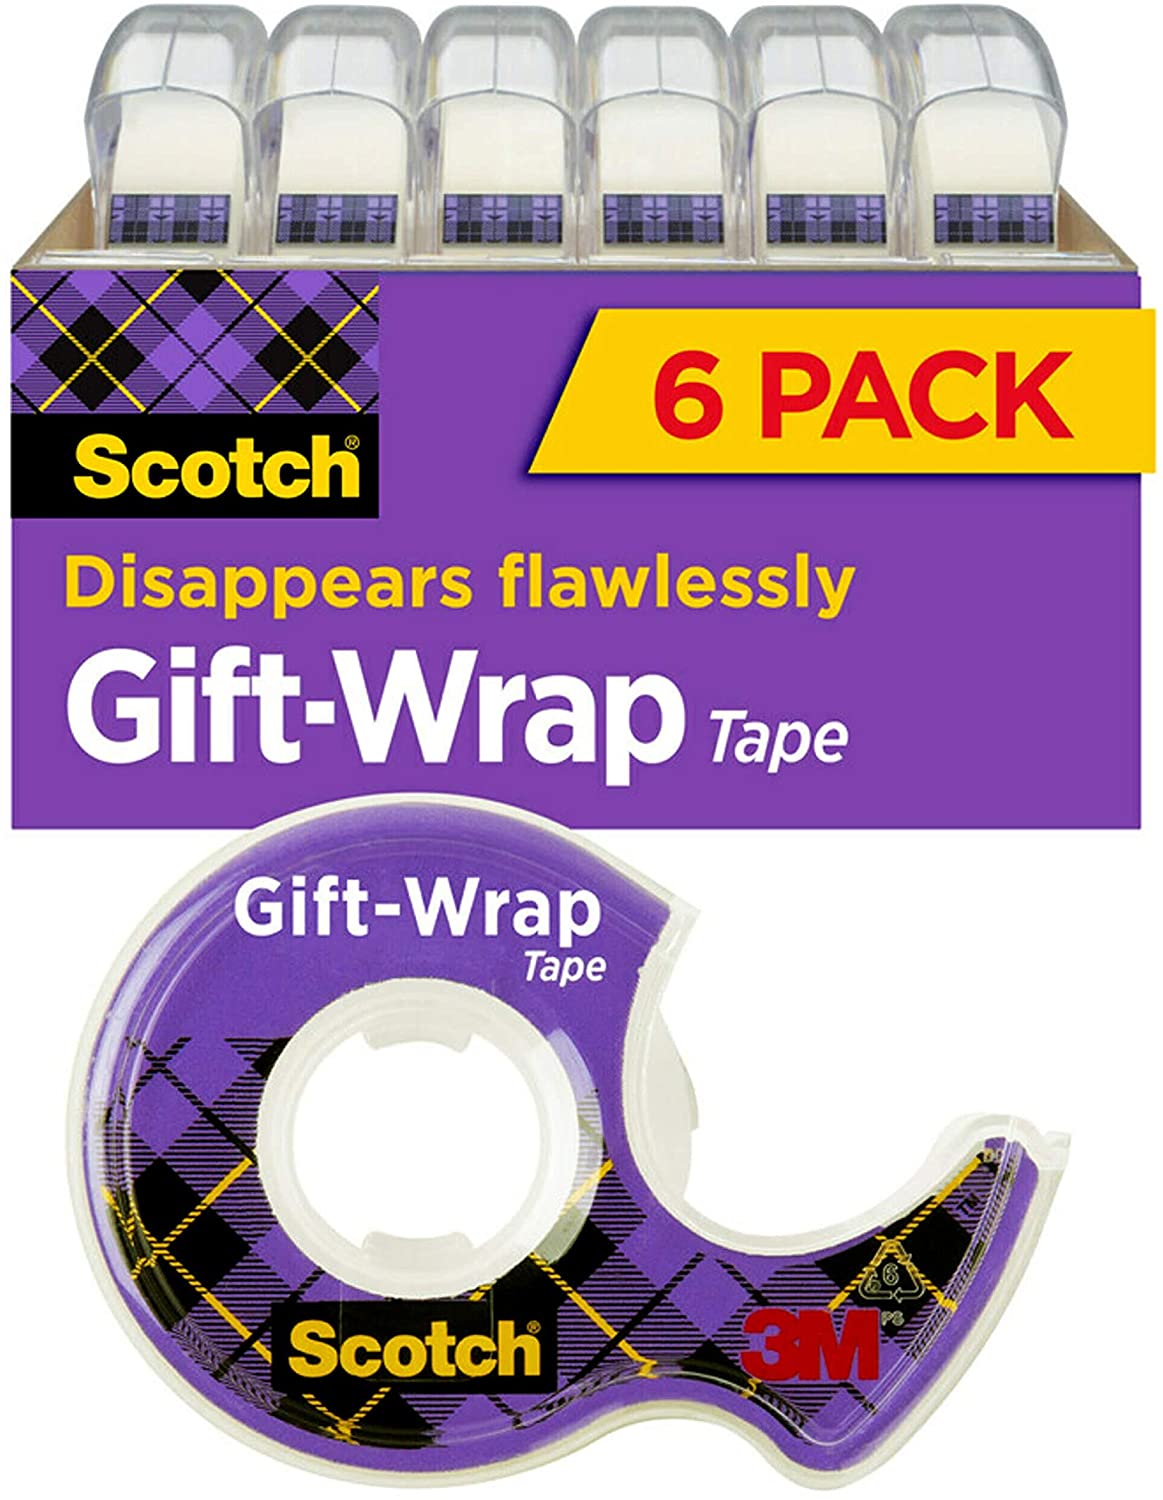 How to use Scotch Gift Wrap Tape for gift wrapping | The Dating Divas 